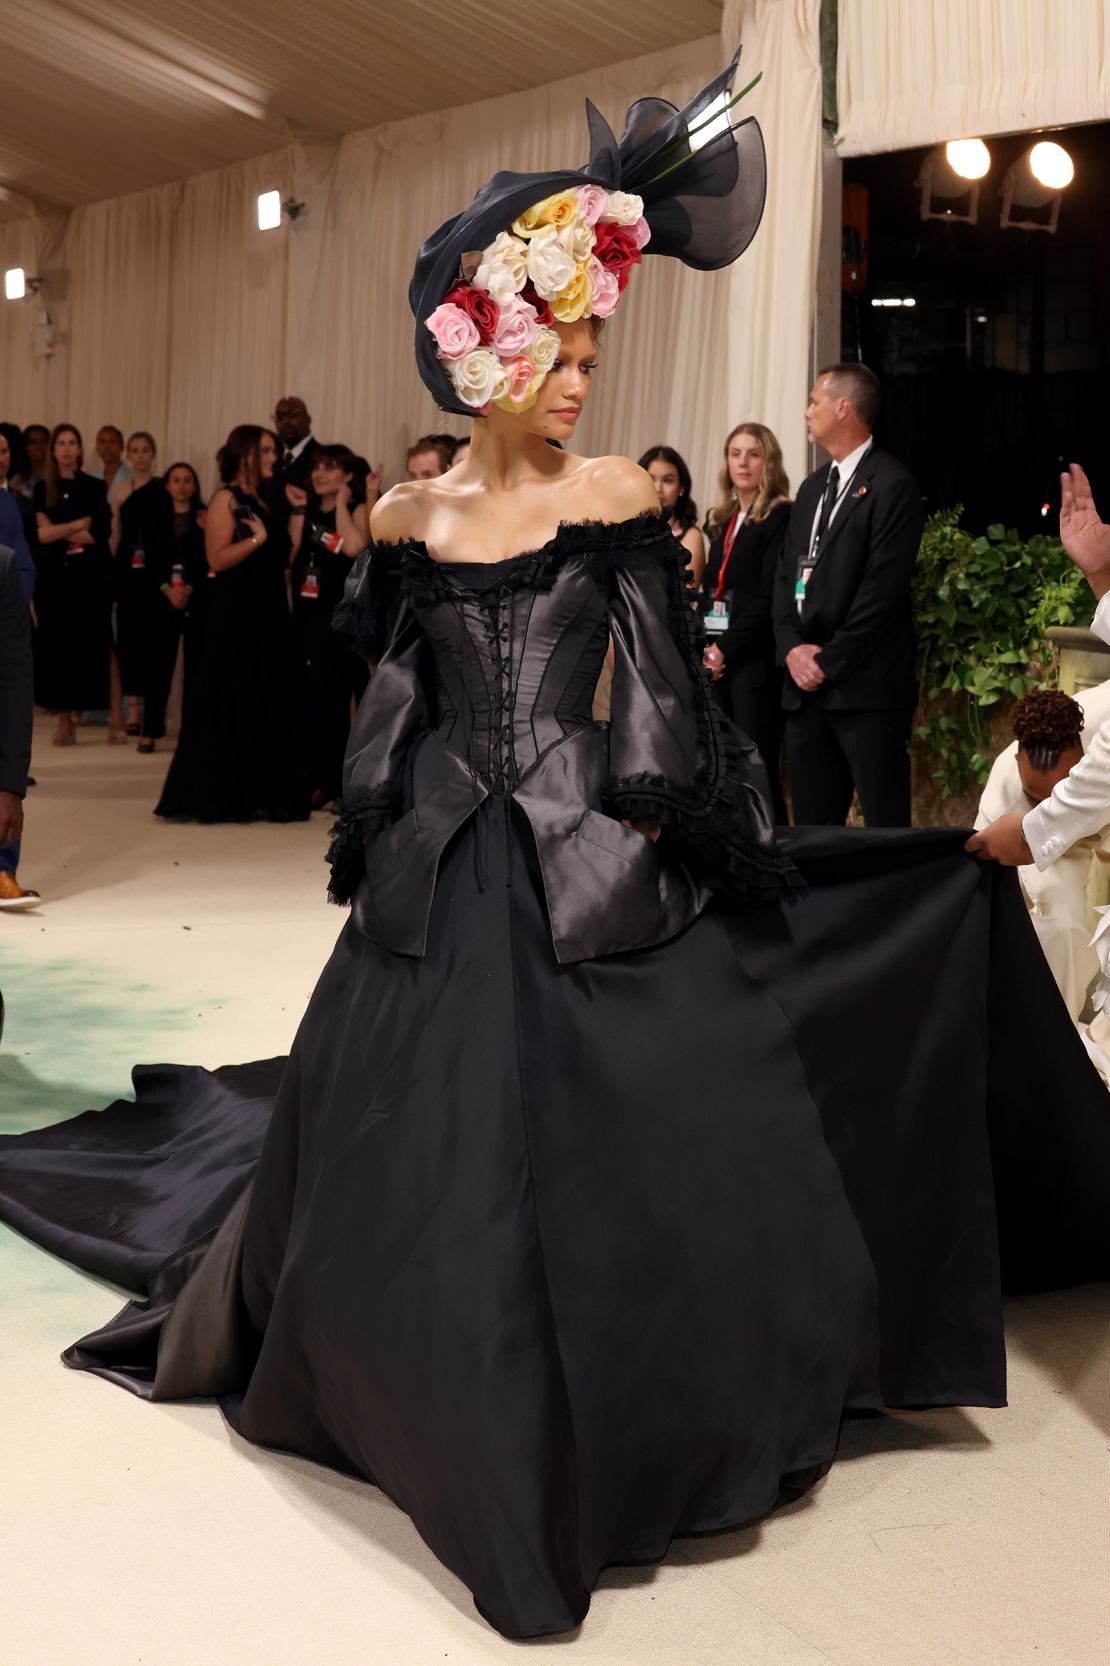 Zendaya's second look of the evening was a gothic Givenchy gown from 1996.